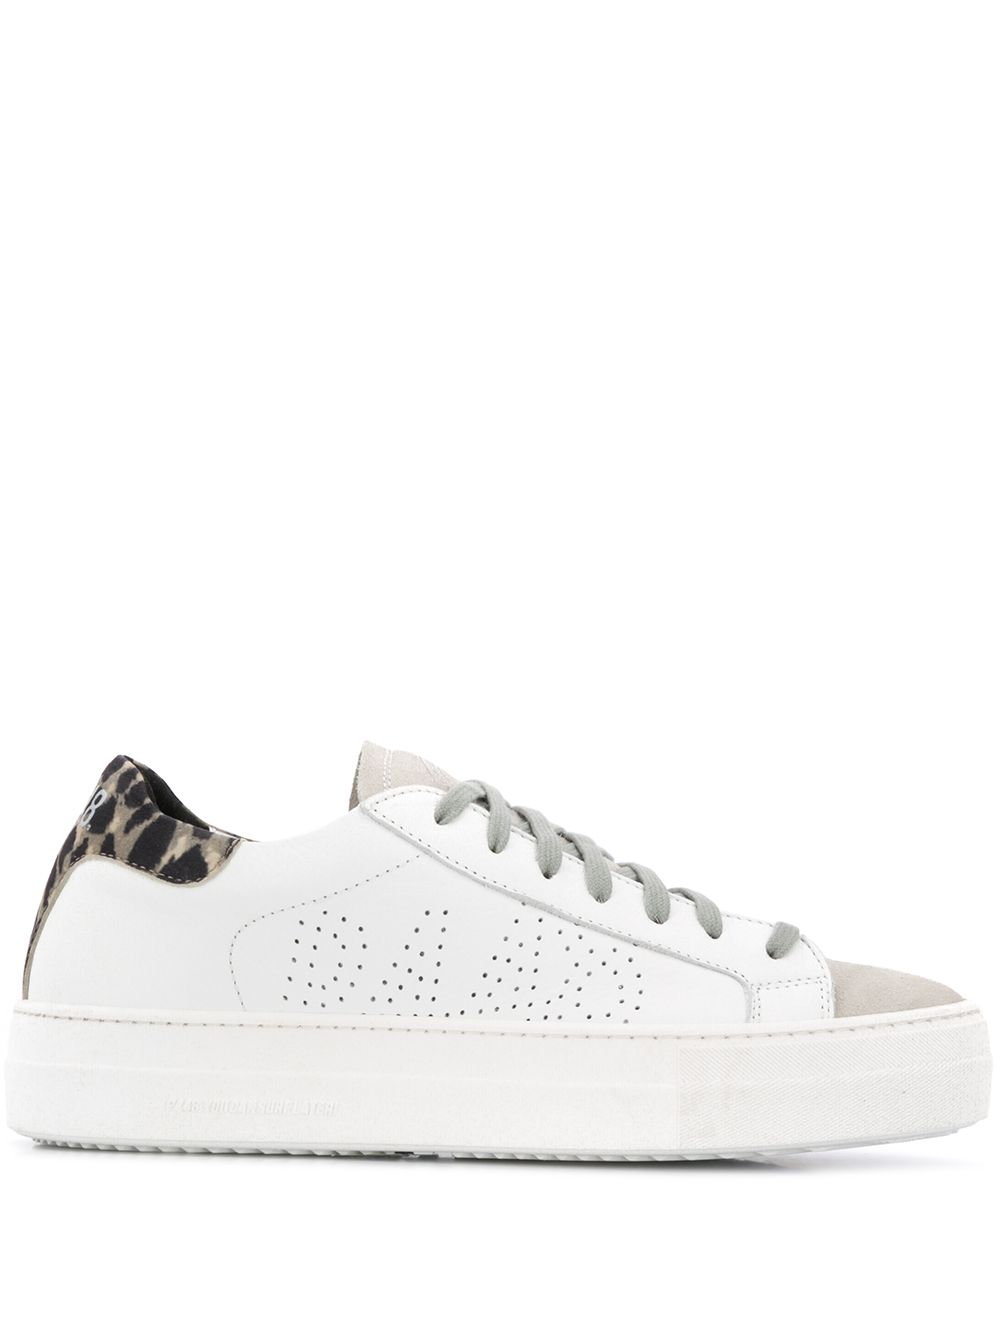 P448 Thea Panelled Sneakers | Farfetch.com